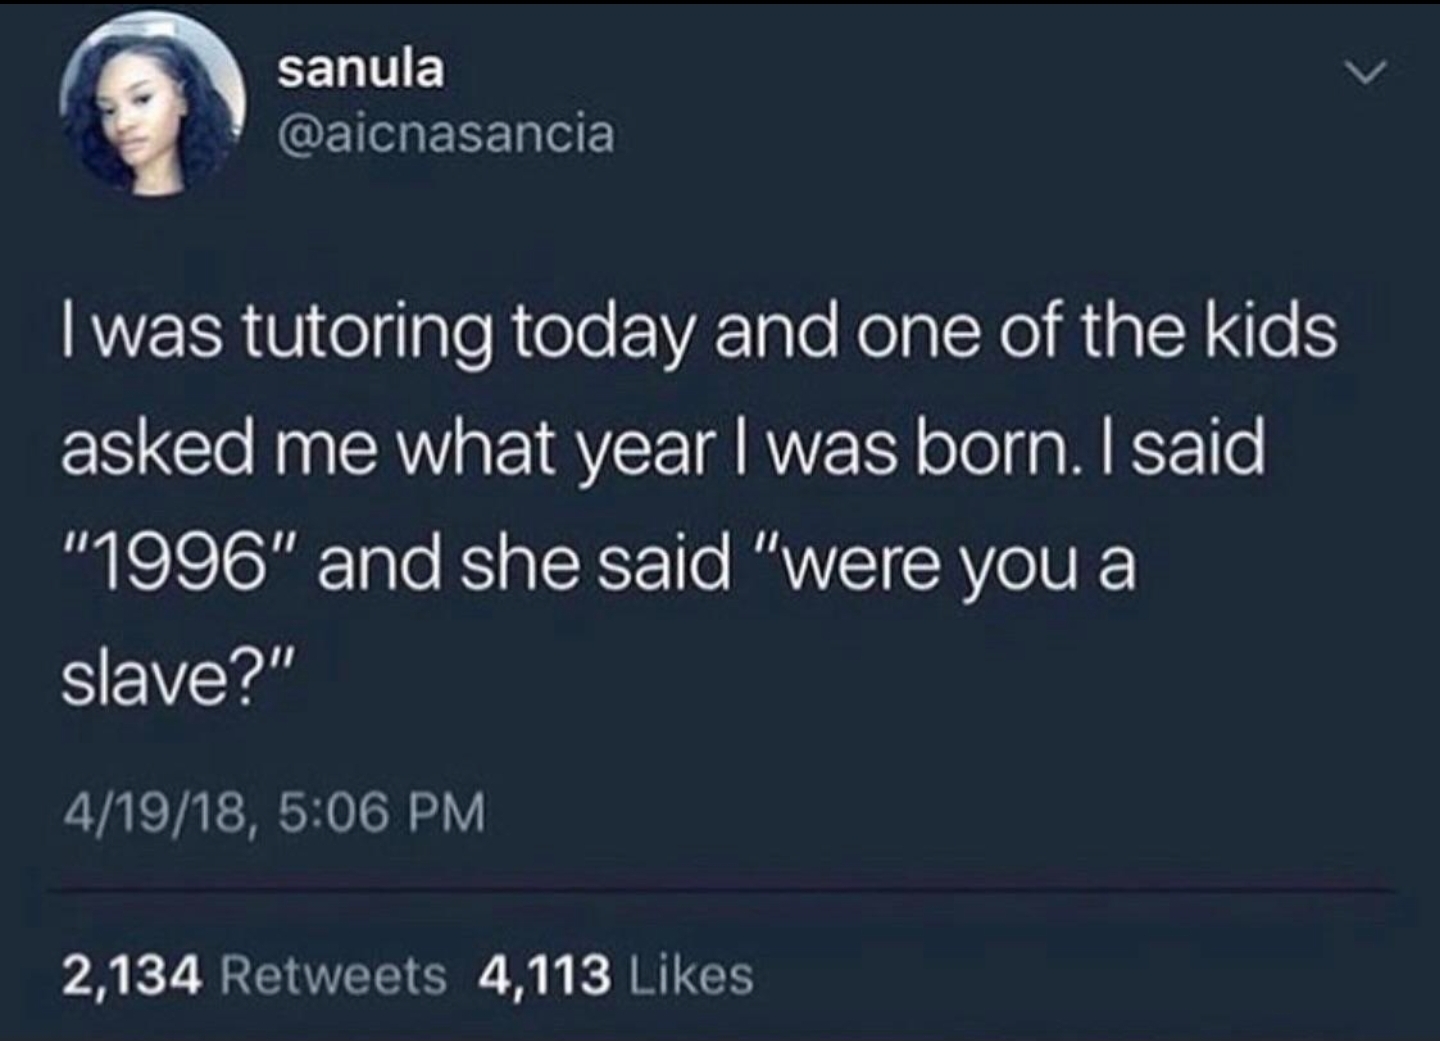 stefflon don racist tweets - sanula I was tutoring today and one of the kids asked me what year I was born. I said "1996" and she said "were you a slave?" 41918, 2,134 4,113